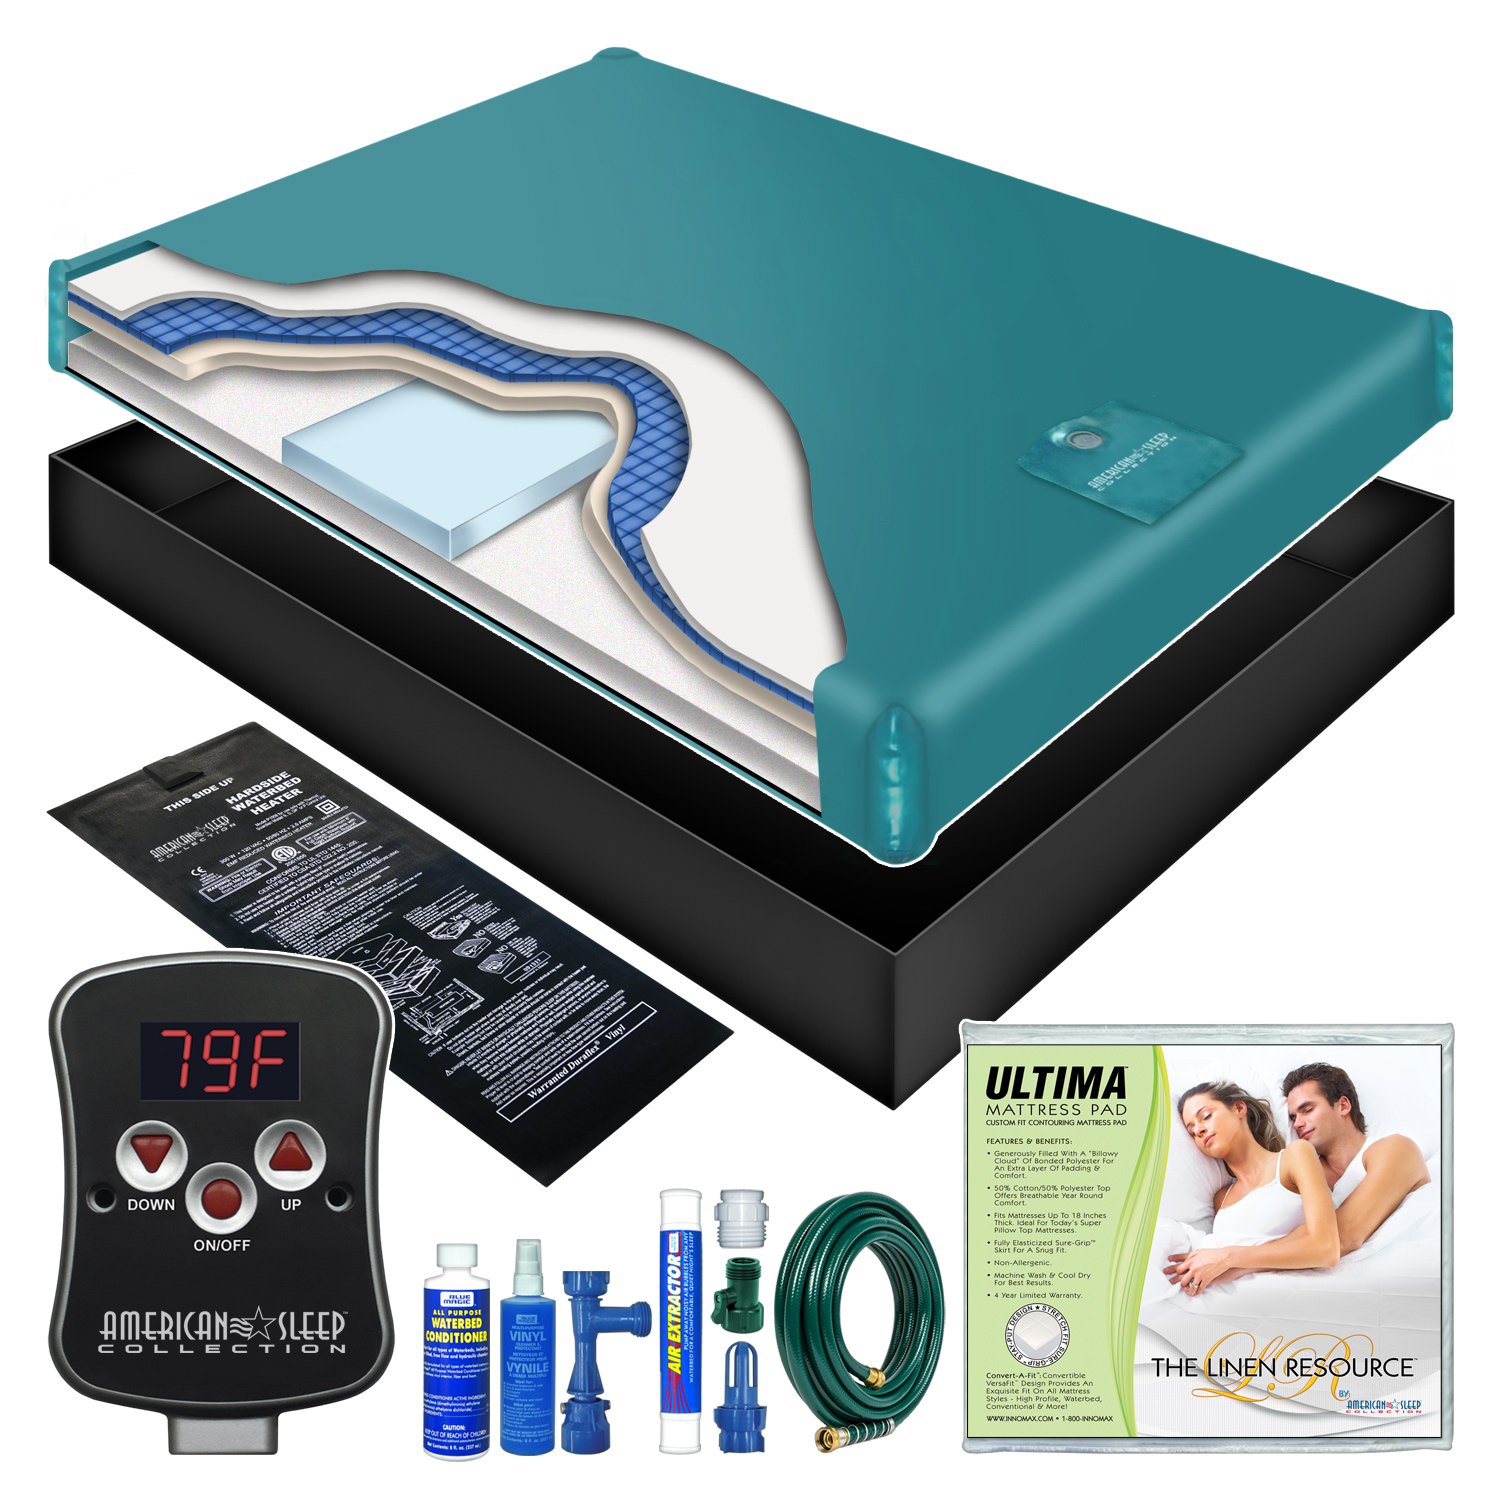 QUEEN Waveless SOFT-SIDE Waterbed Mattress Fits 6 depth waterbed Fill & Drain Kit Included